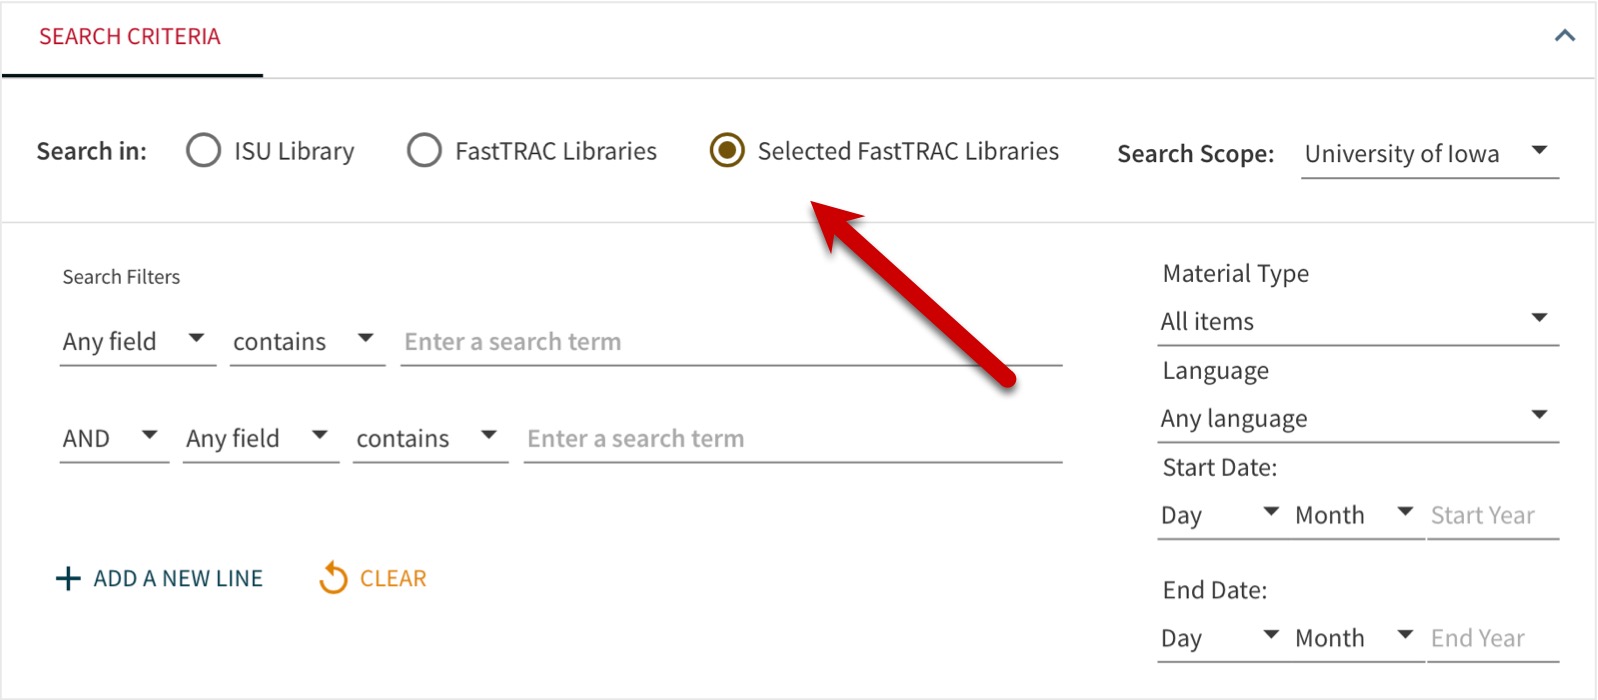 Quick Search’s advanced search interface. At the top are 3 radio buttons. The linestarts with “Search in:” with choices of the ISU Library or FastTRAC or Selected Partner Libraries. Selected Partner Libraries is chosen and the Search Scope option displays University of Iowa.